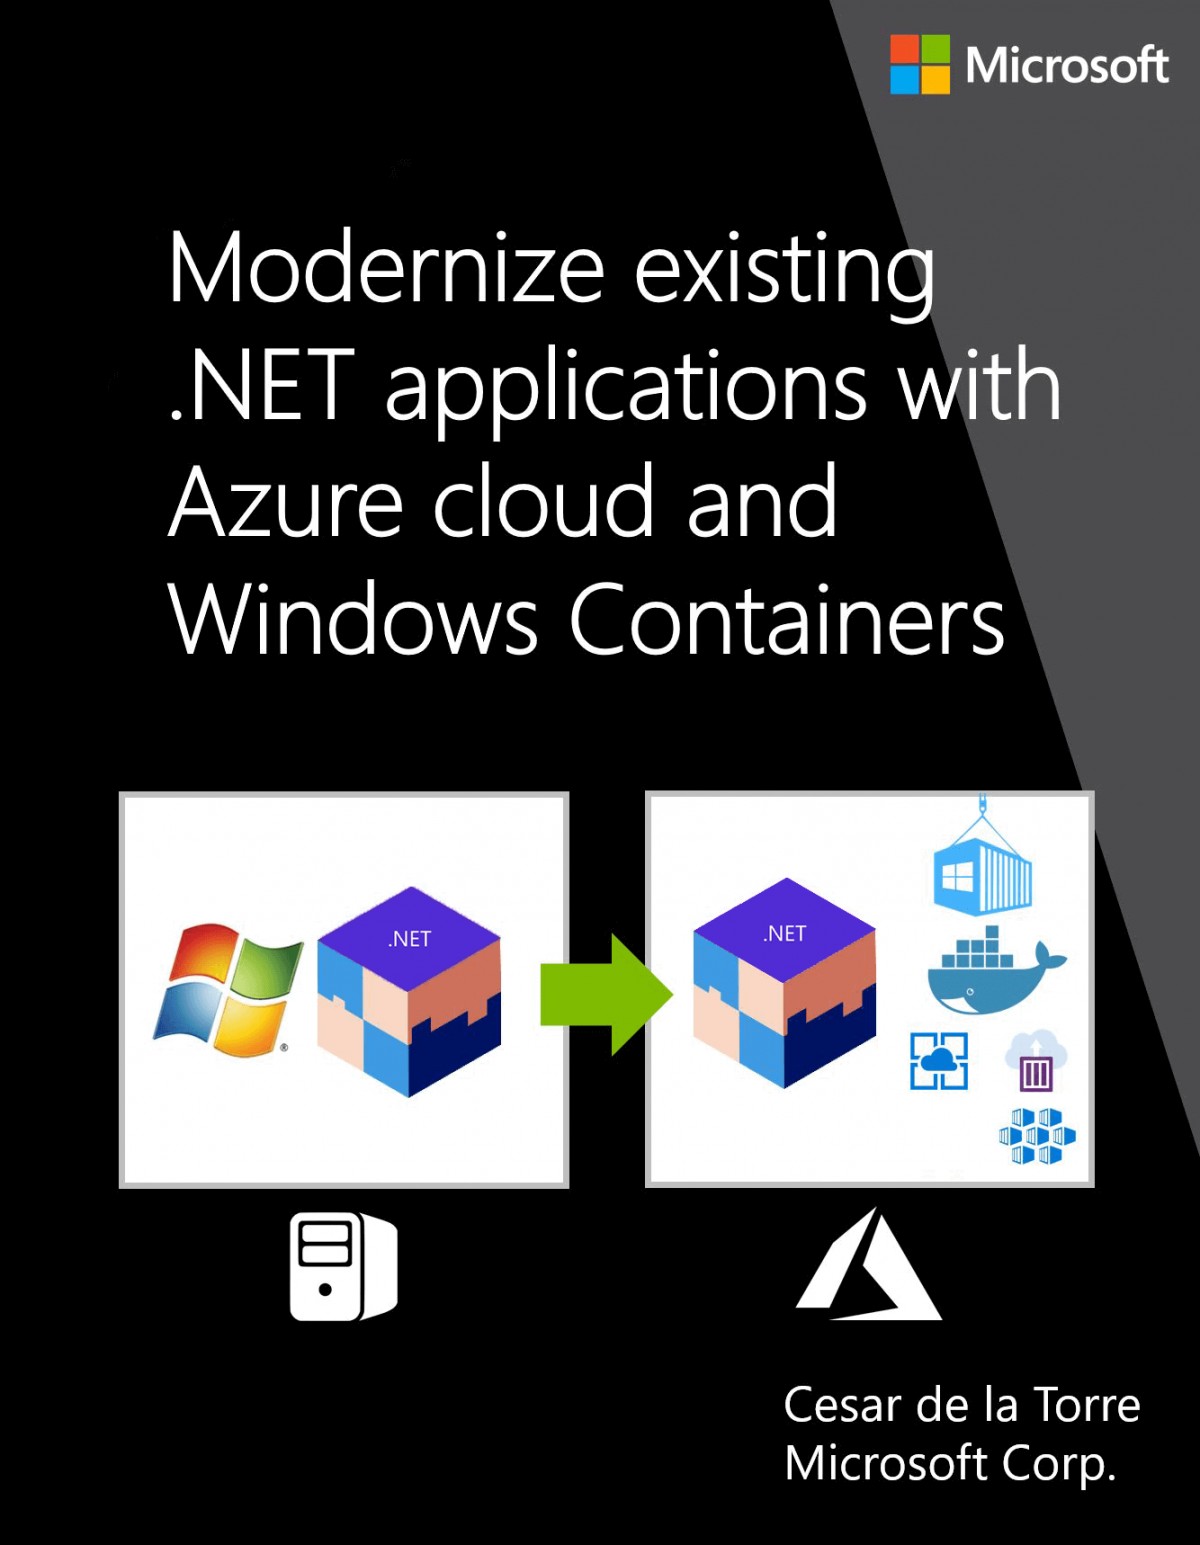 Modernize existing .NET applications with Azure